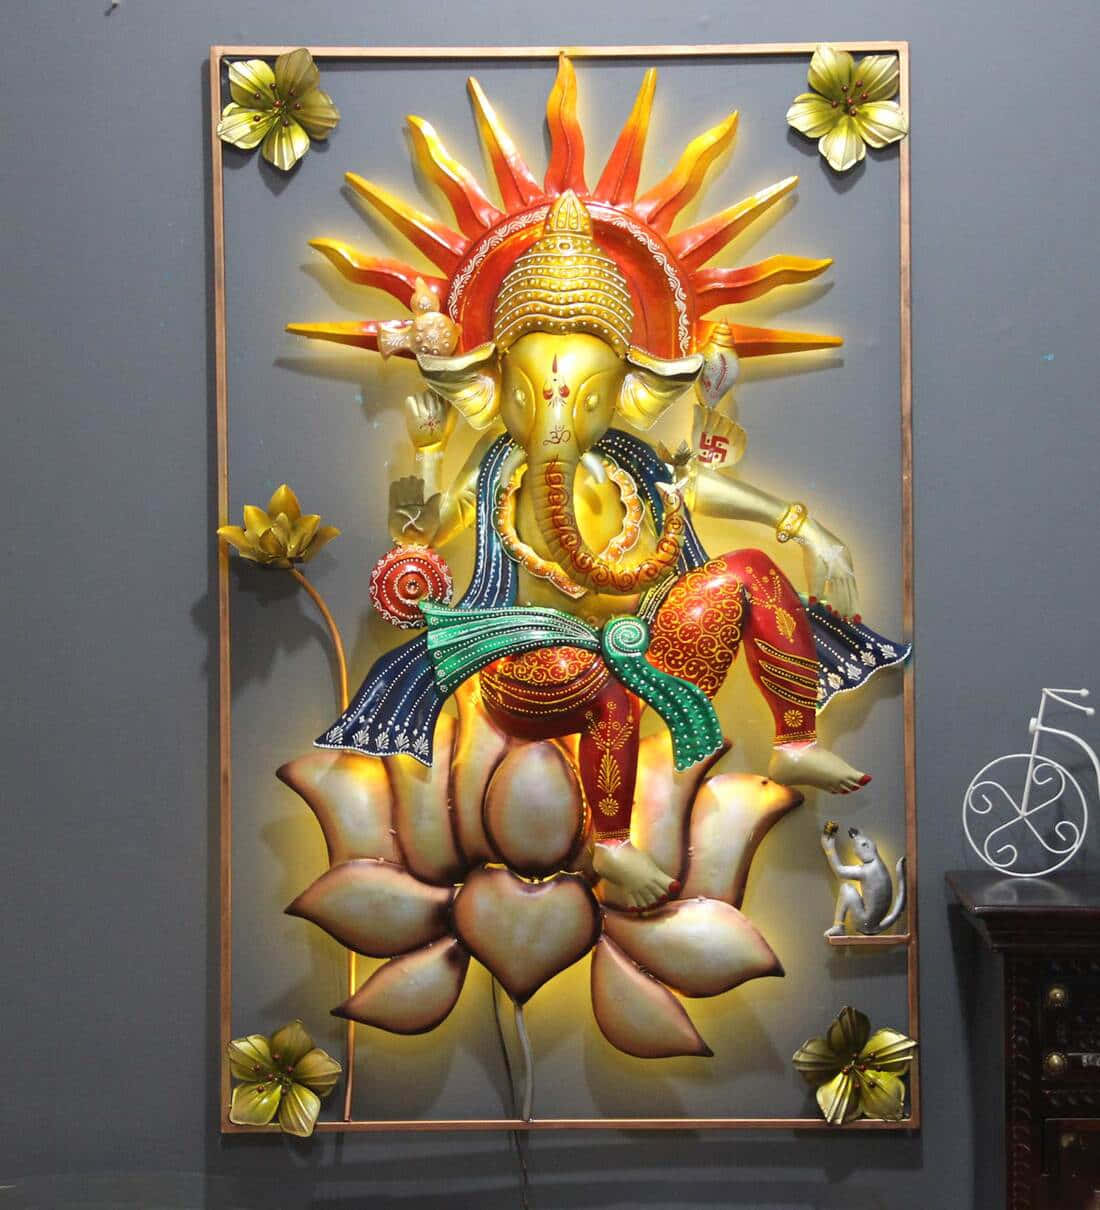 A Large Wall Art With A Ganesha Statue